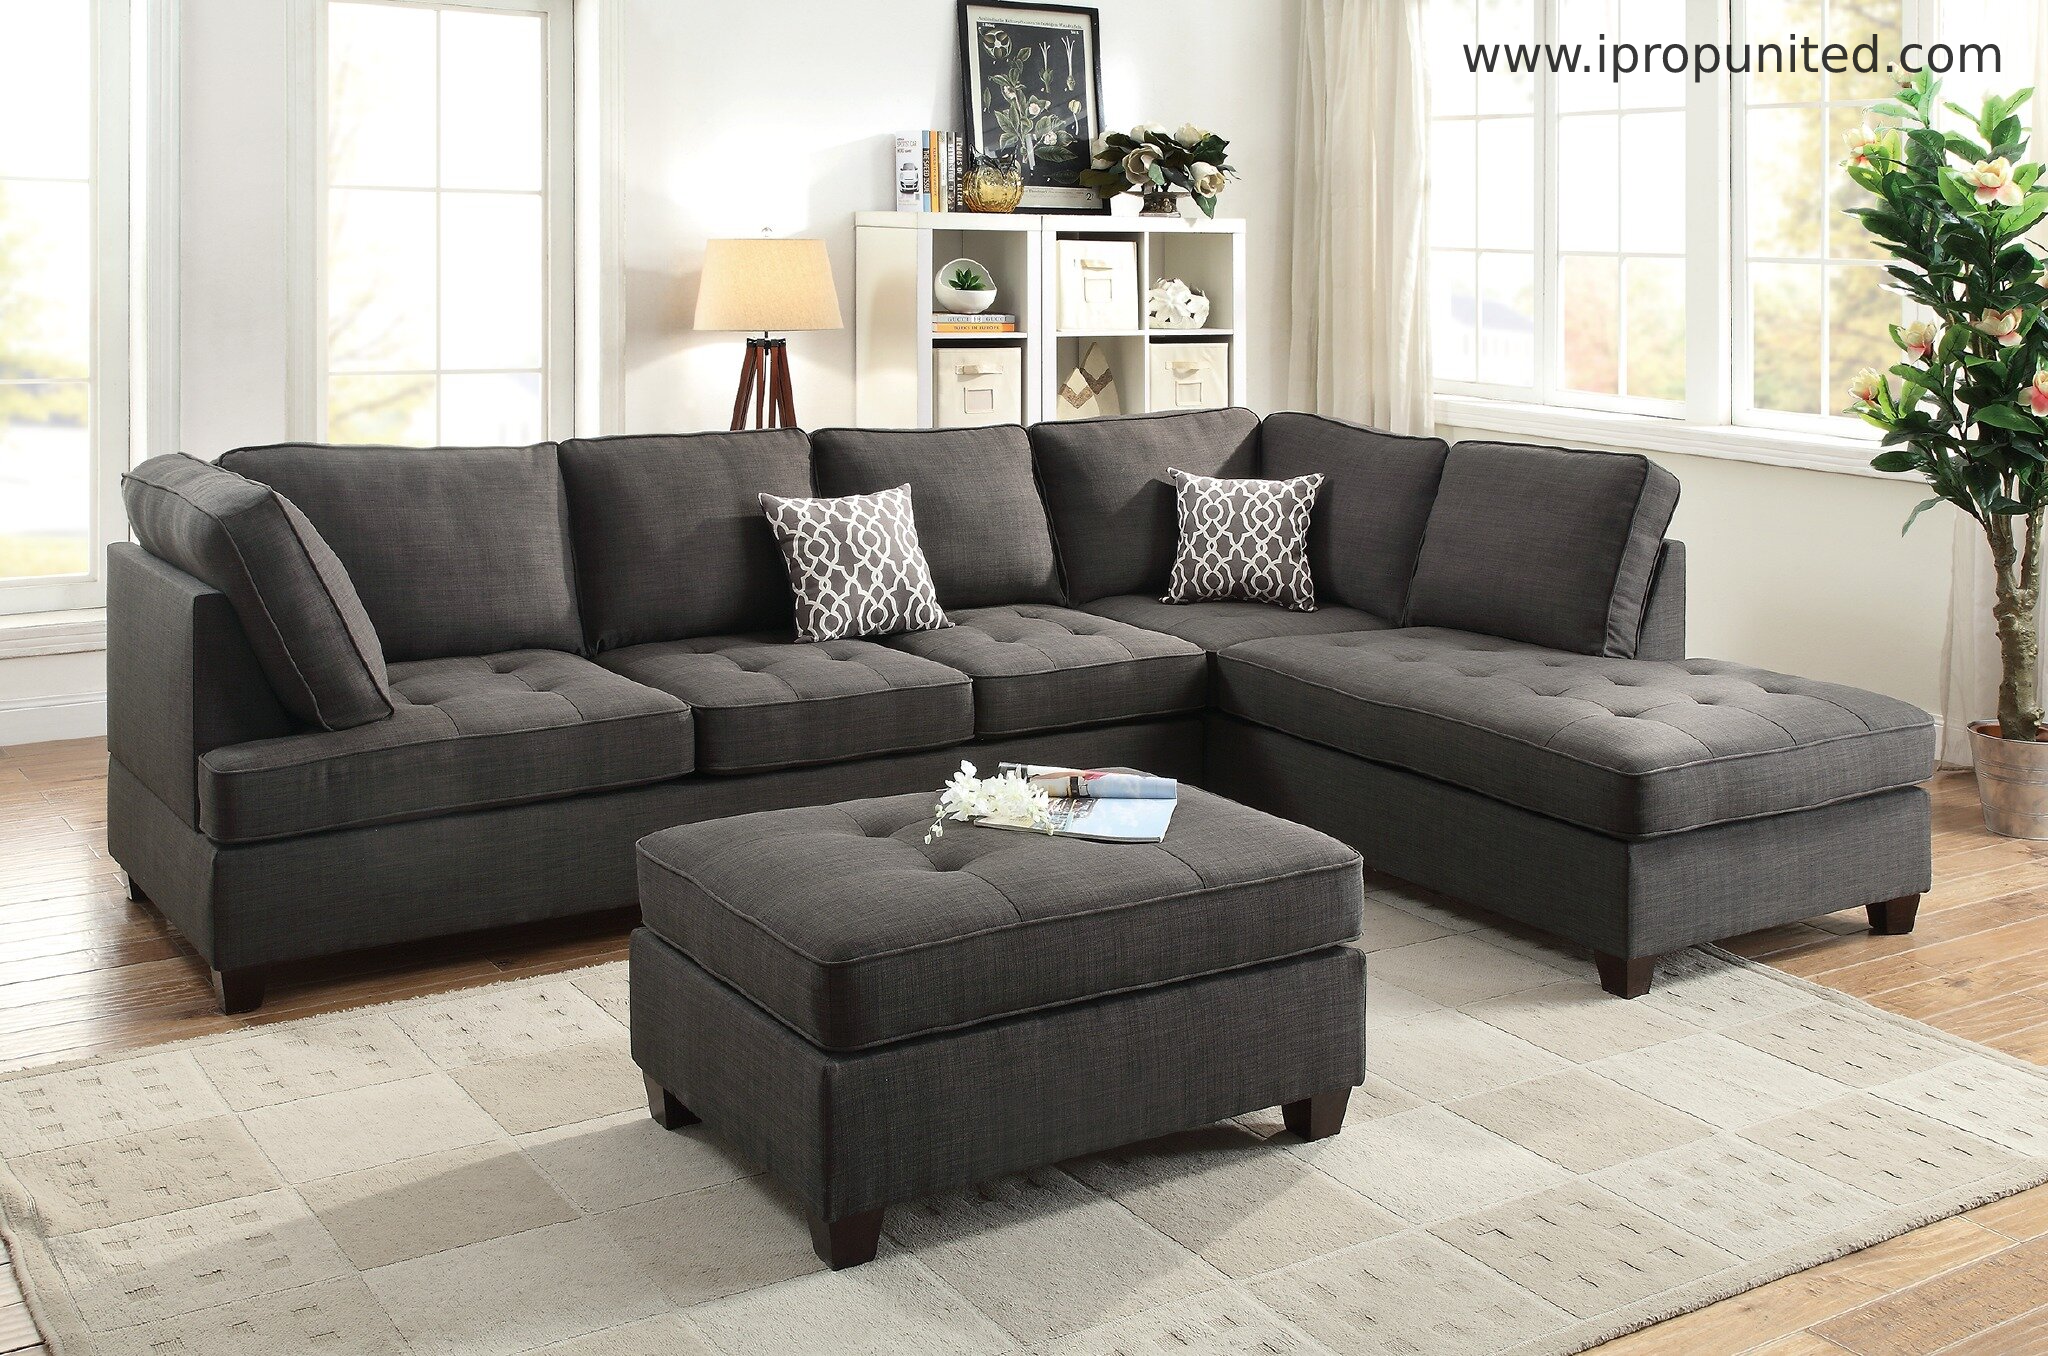 Perfect Guide to purchase sofa set according to your house